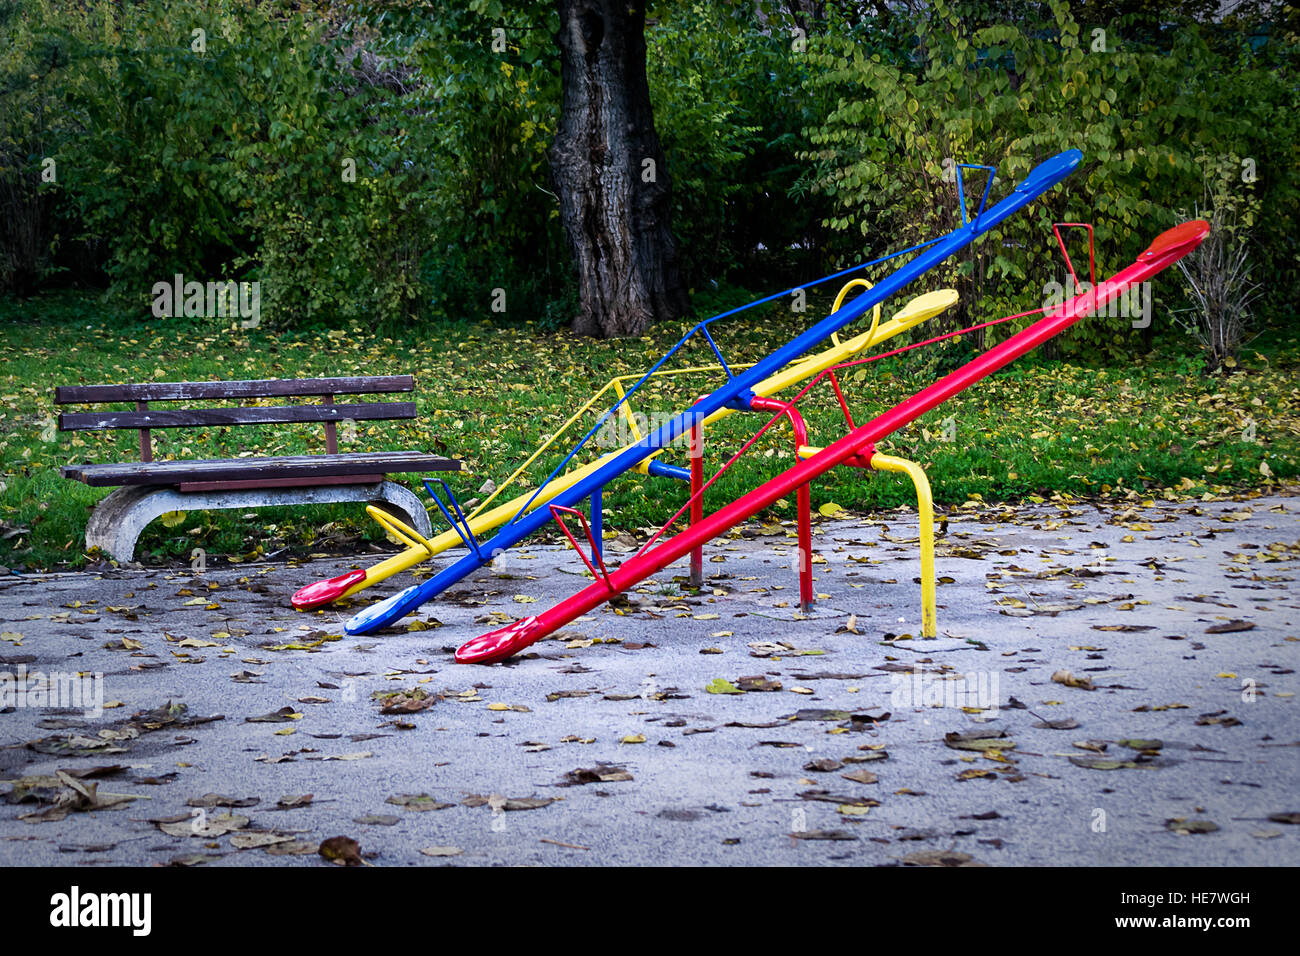 Seesaw or teeter-totter in the park Stock Photo